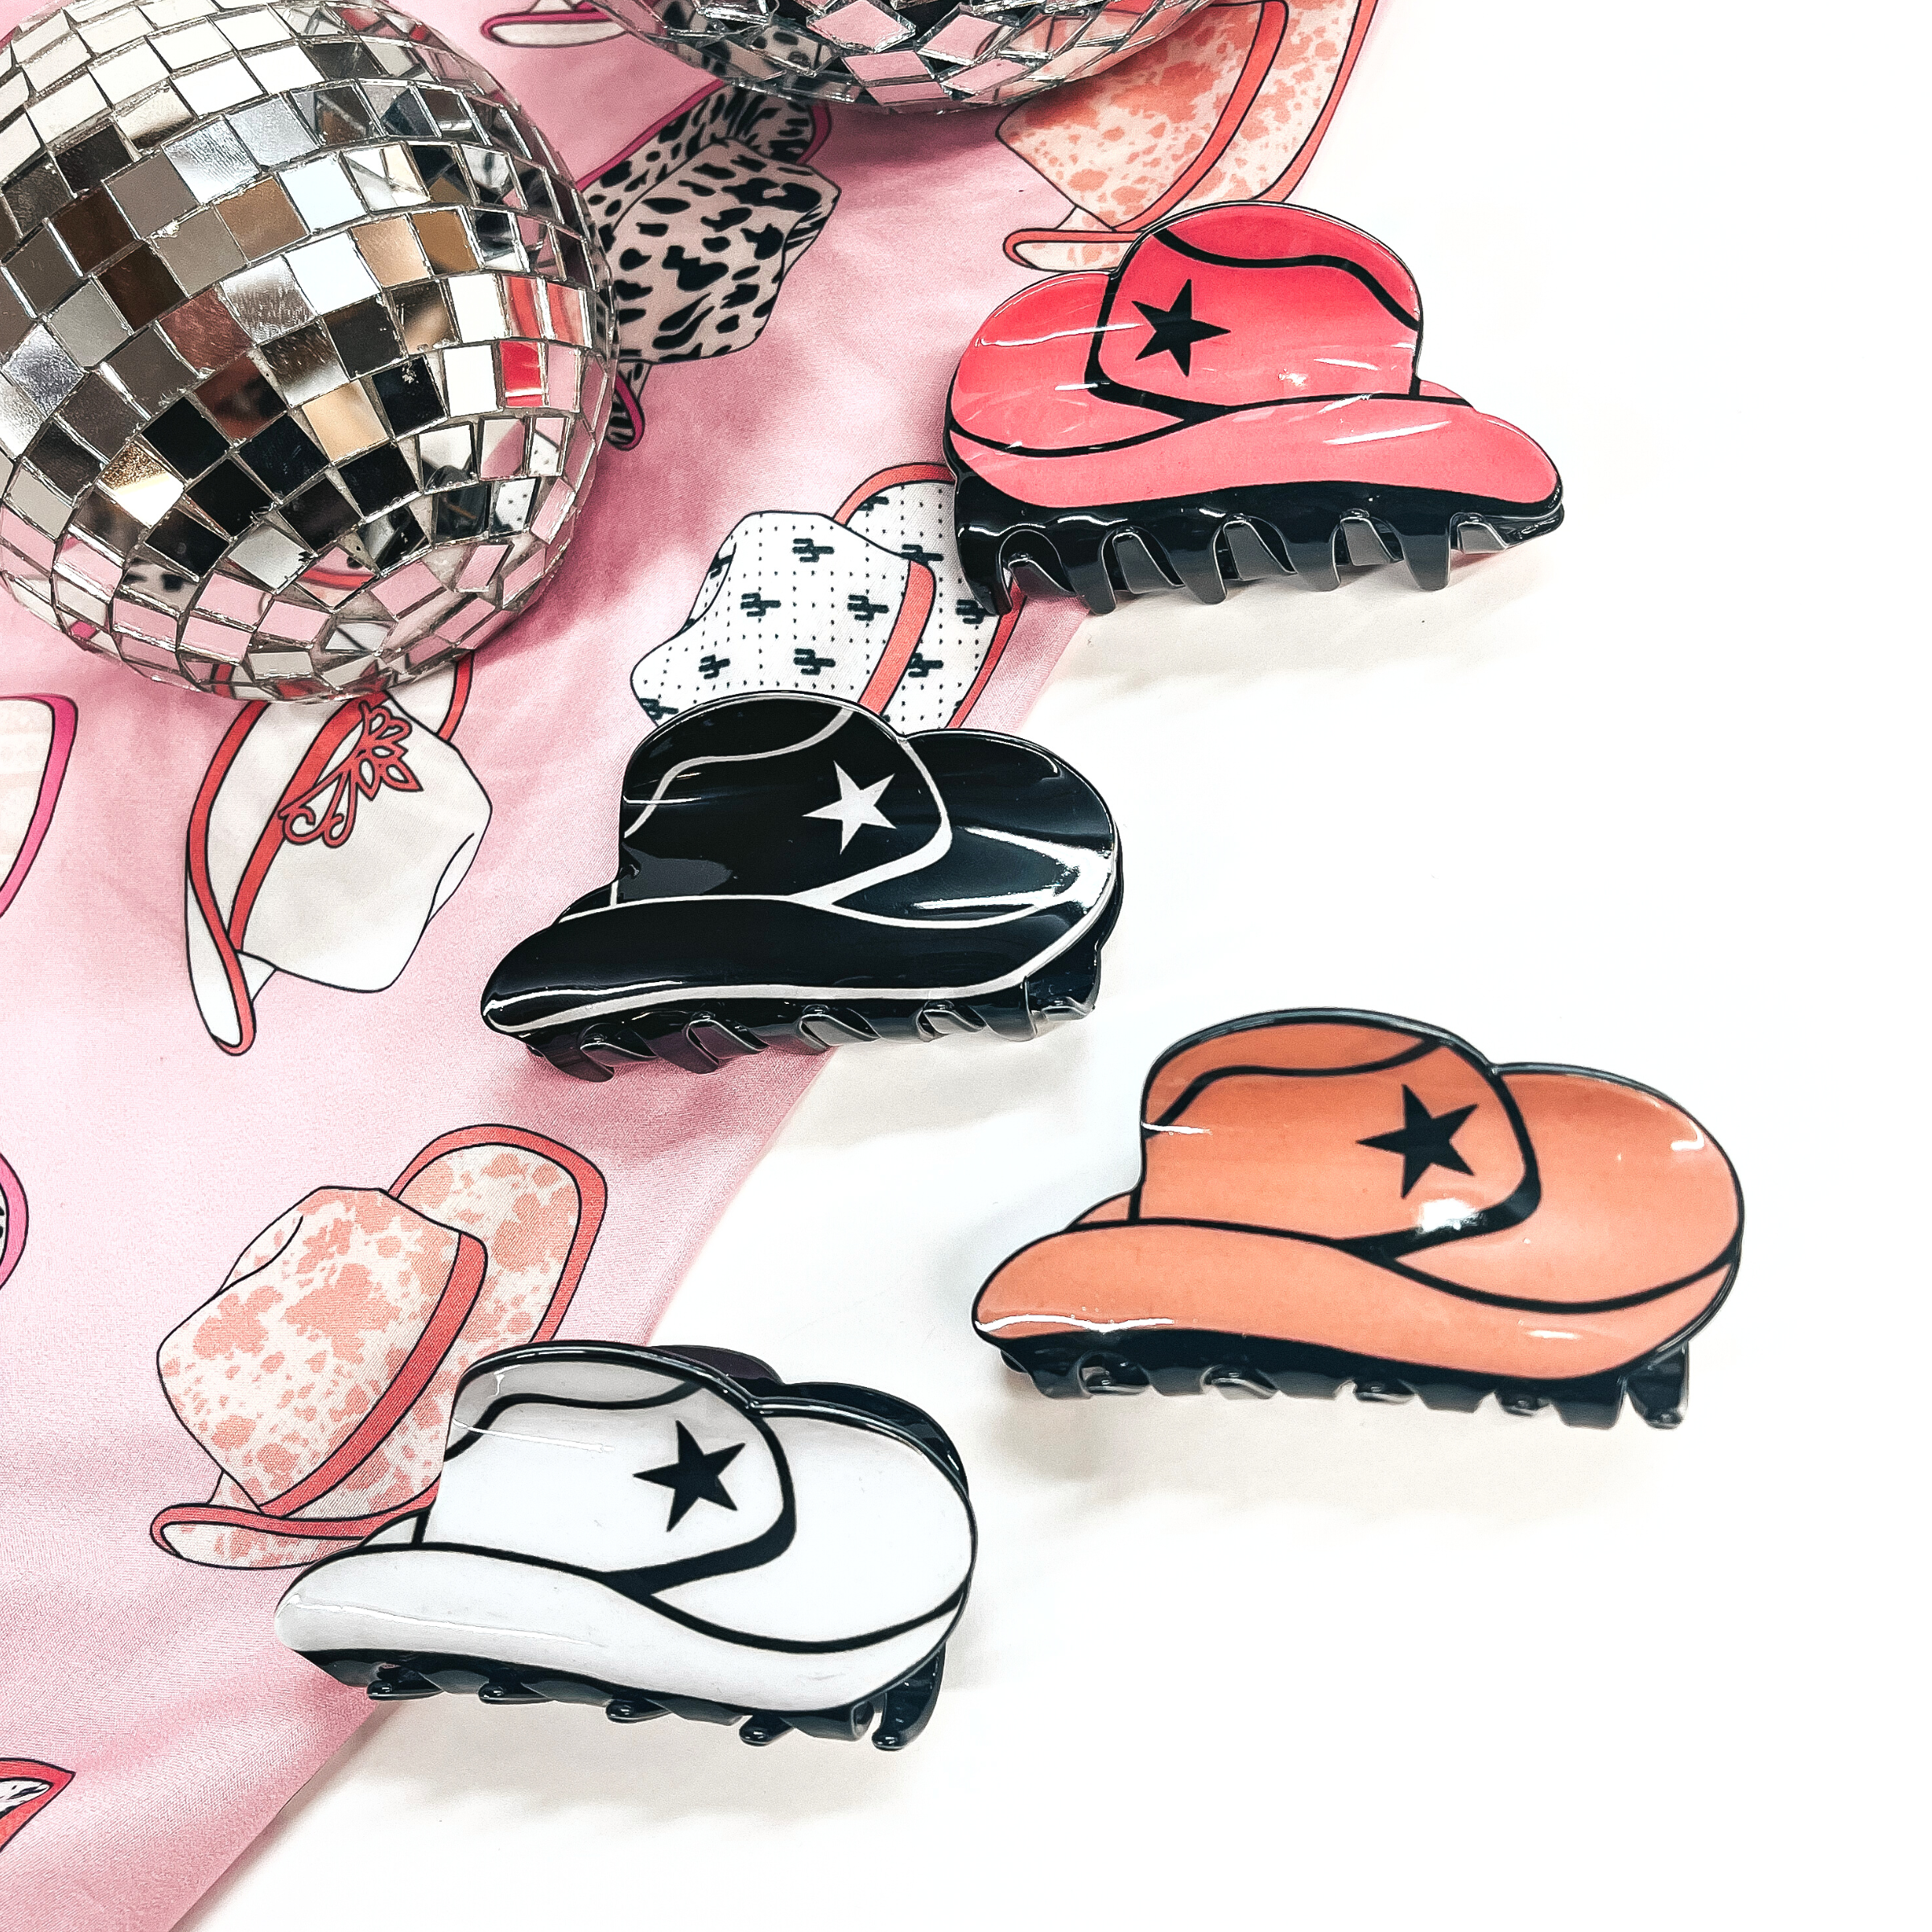 There are four solid color cowboy hat hair clips laying on a cowboy hat print fabric and a white background with two disco balls in the back as decor.